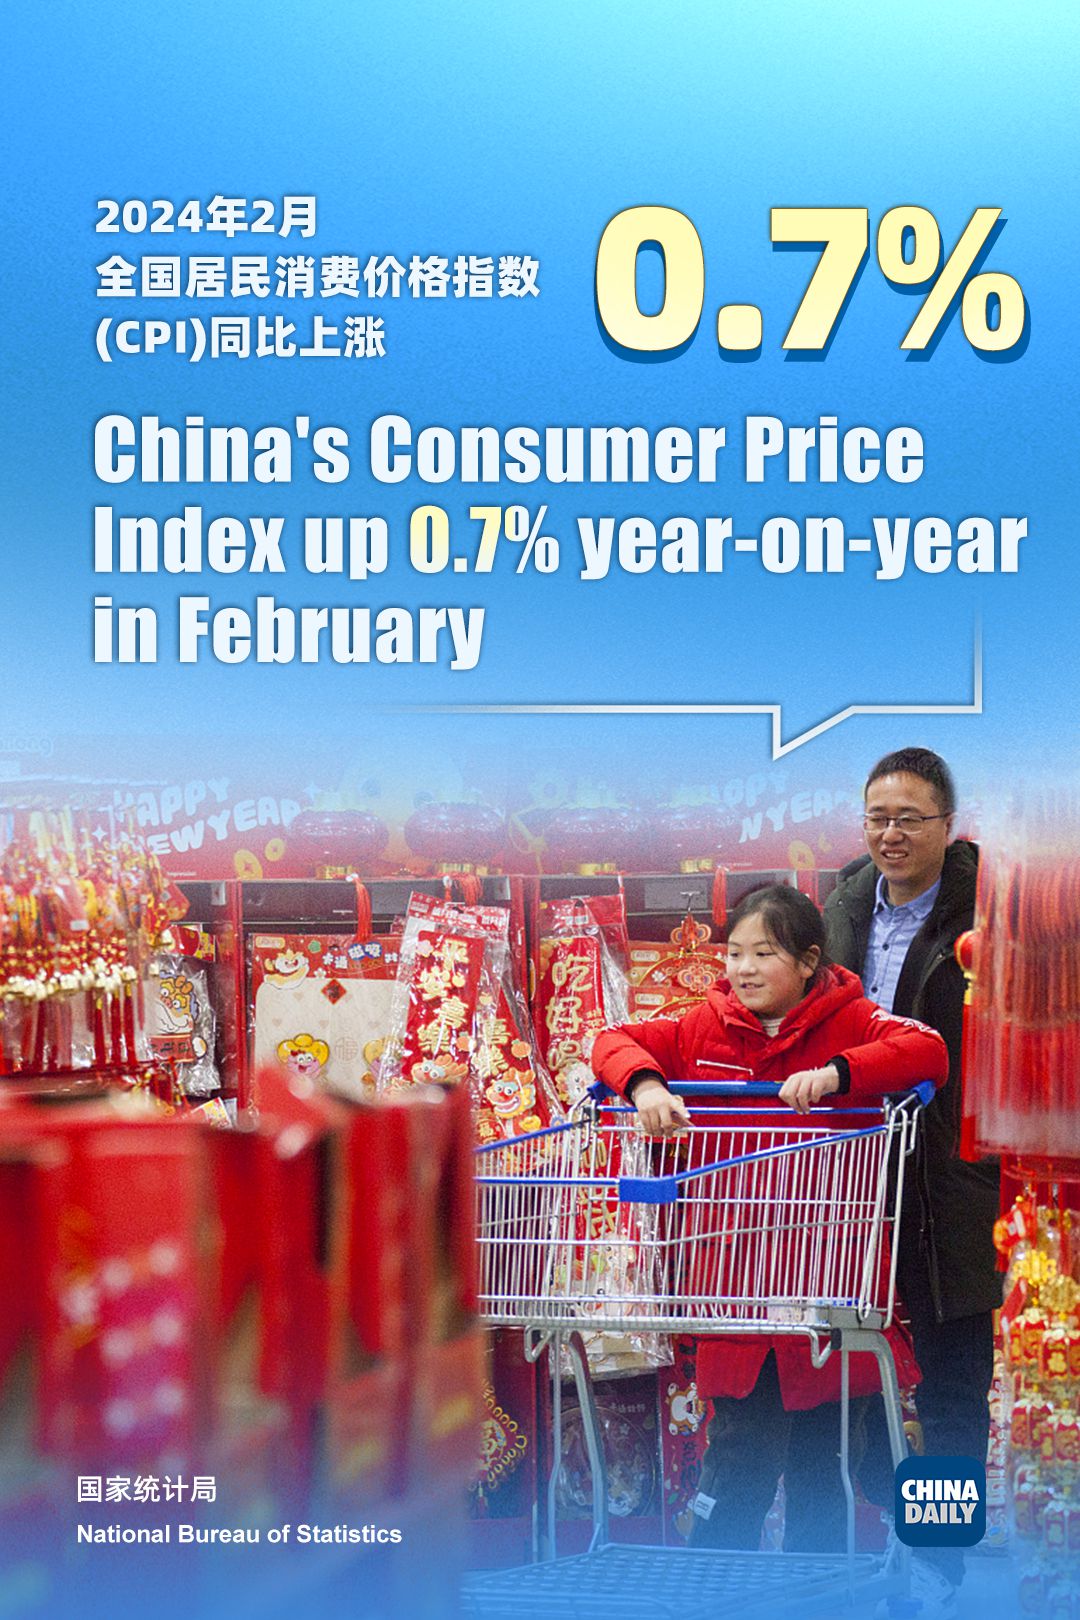 China's consumer prices return to positive territory